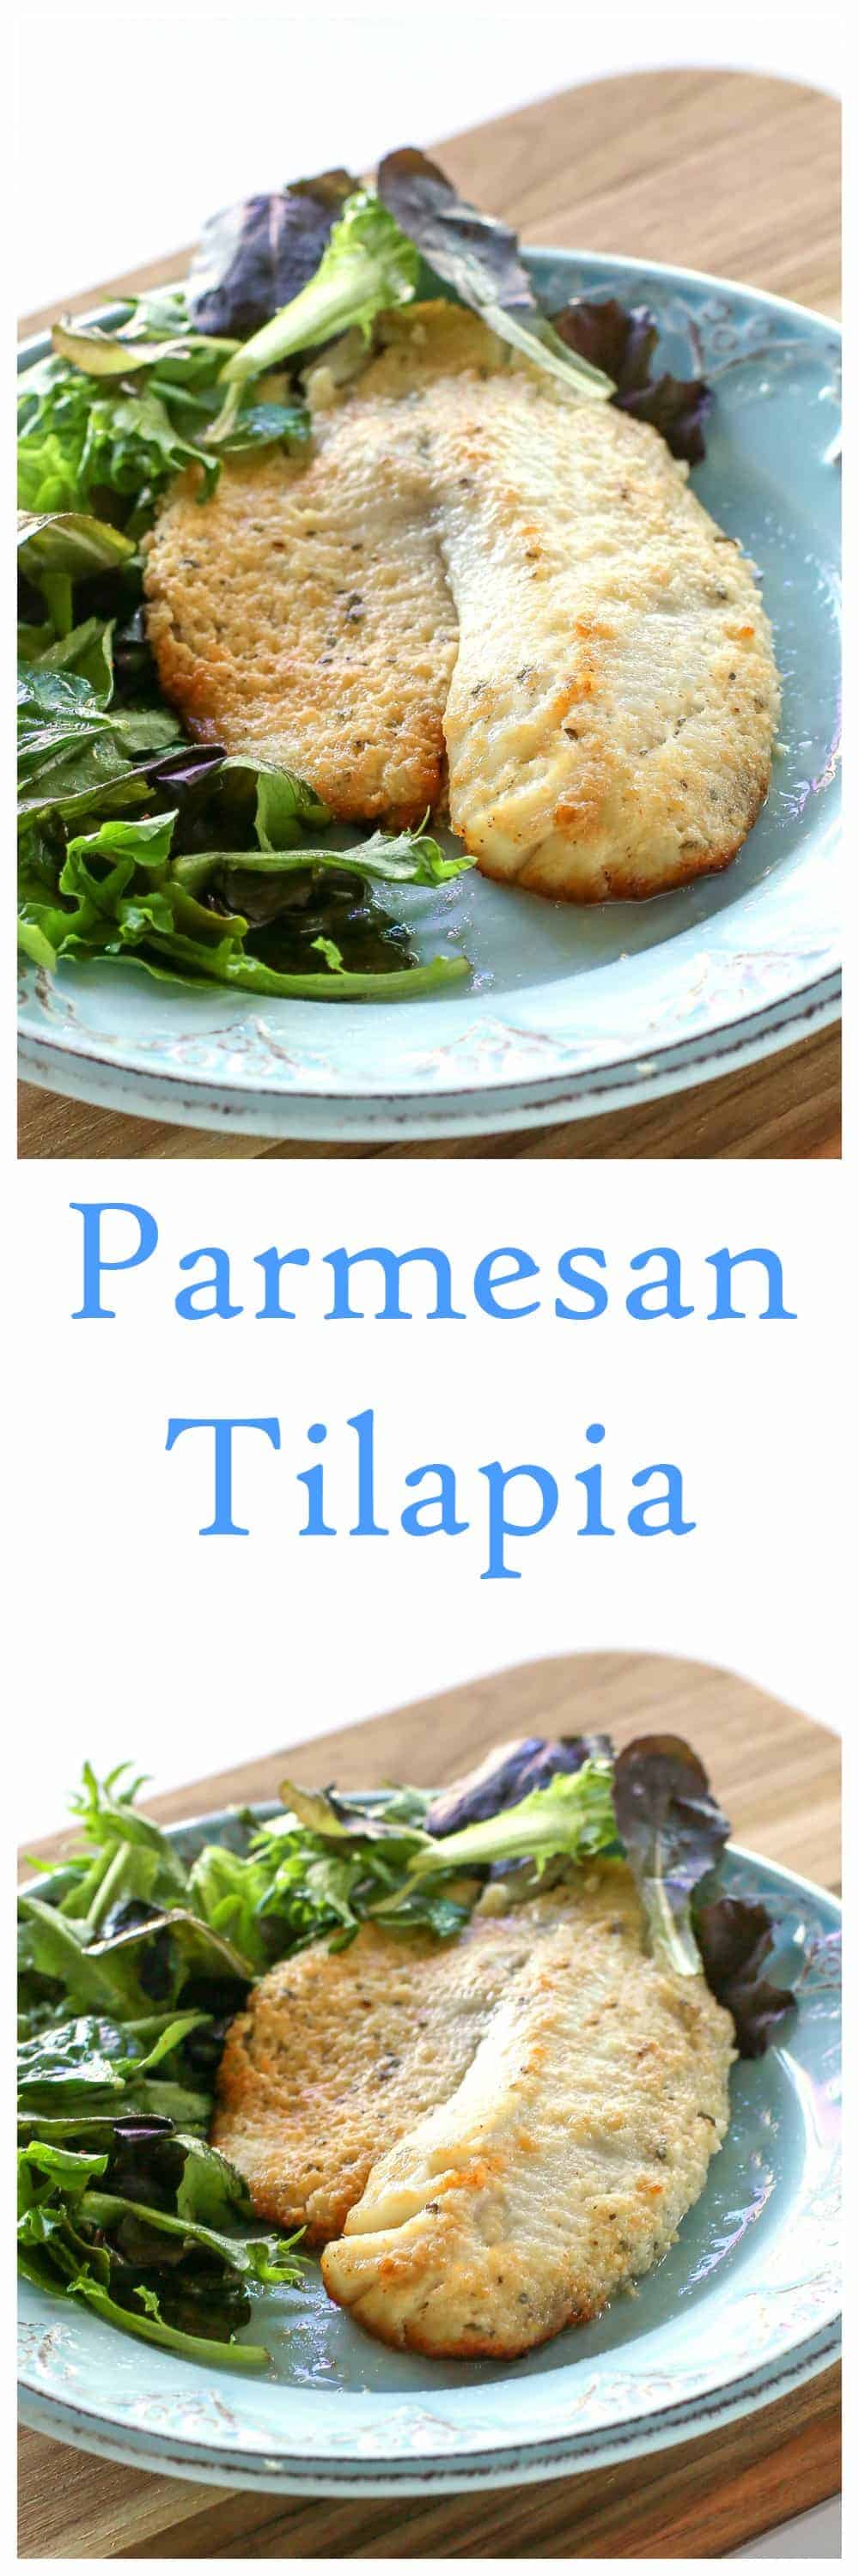 Parmesan Tilapia - a fish recipe that tastes like Doritos and it's healthy. the-girl-who-ate-everything.com